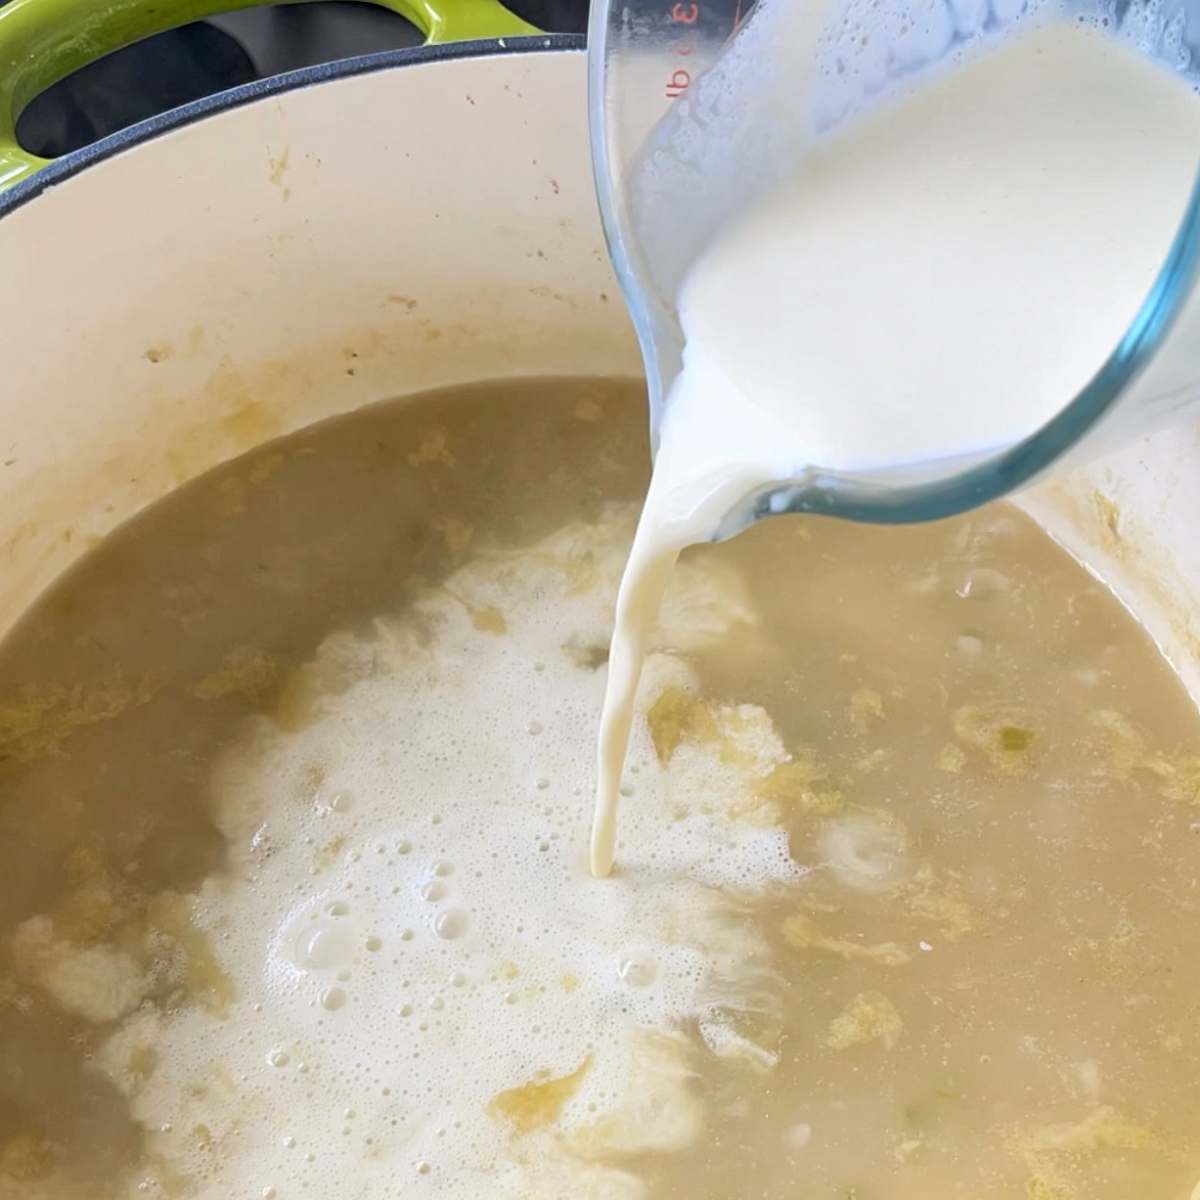 Cream being poured into the seafood chowder broth over a medium heat